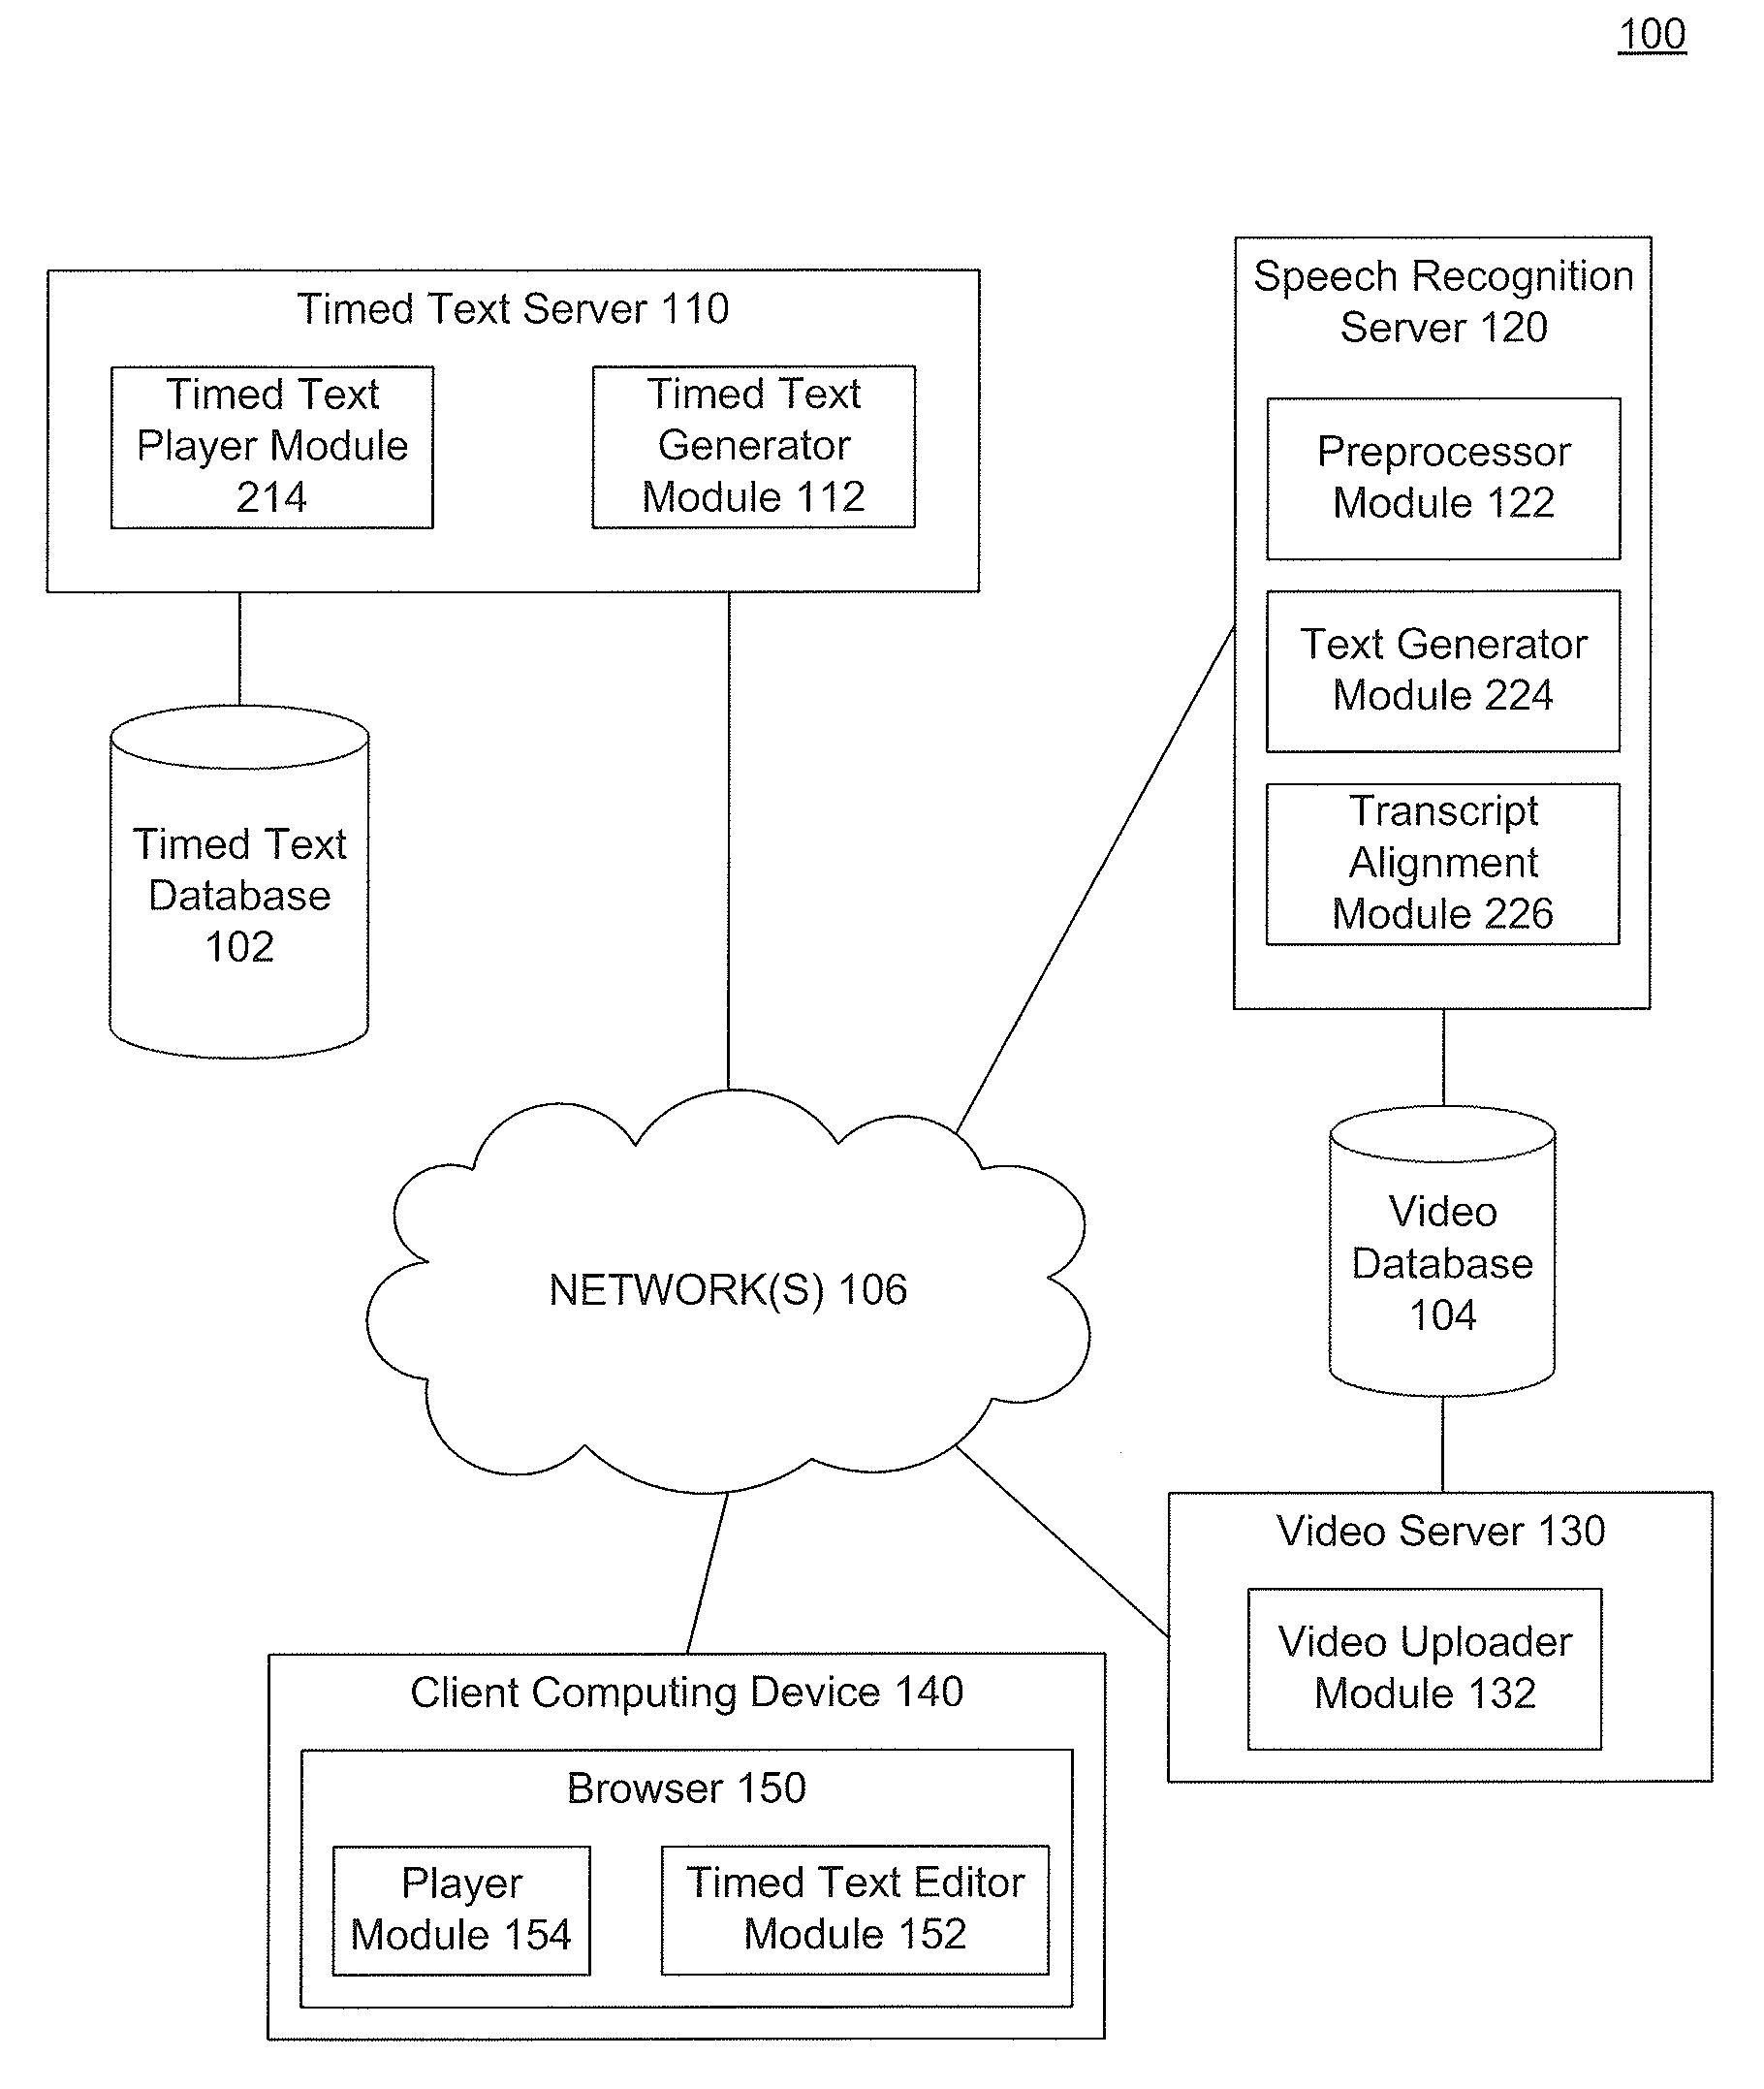 Generation of timed text using speech-to-text technology and applications thereof